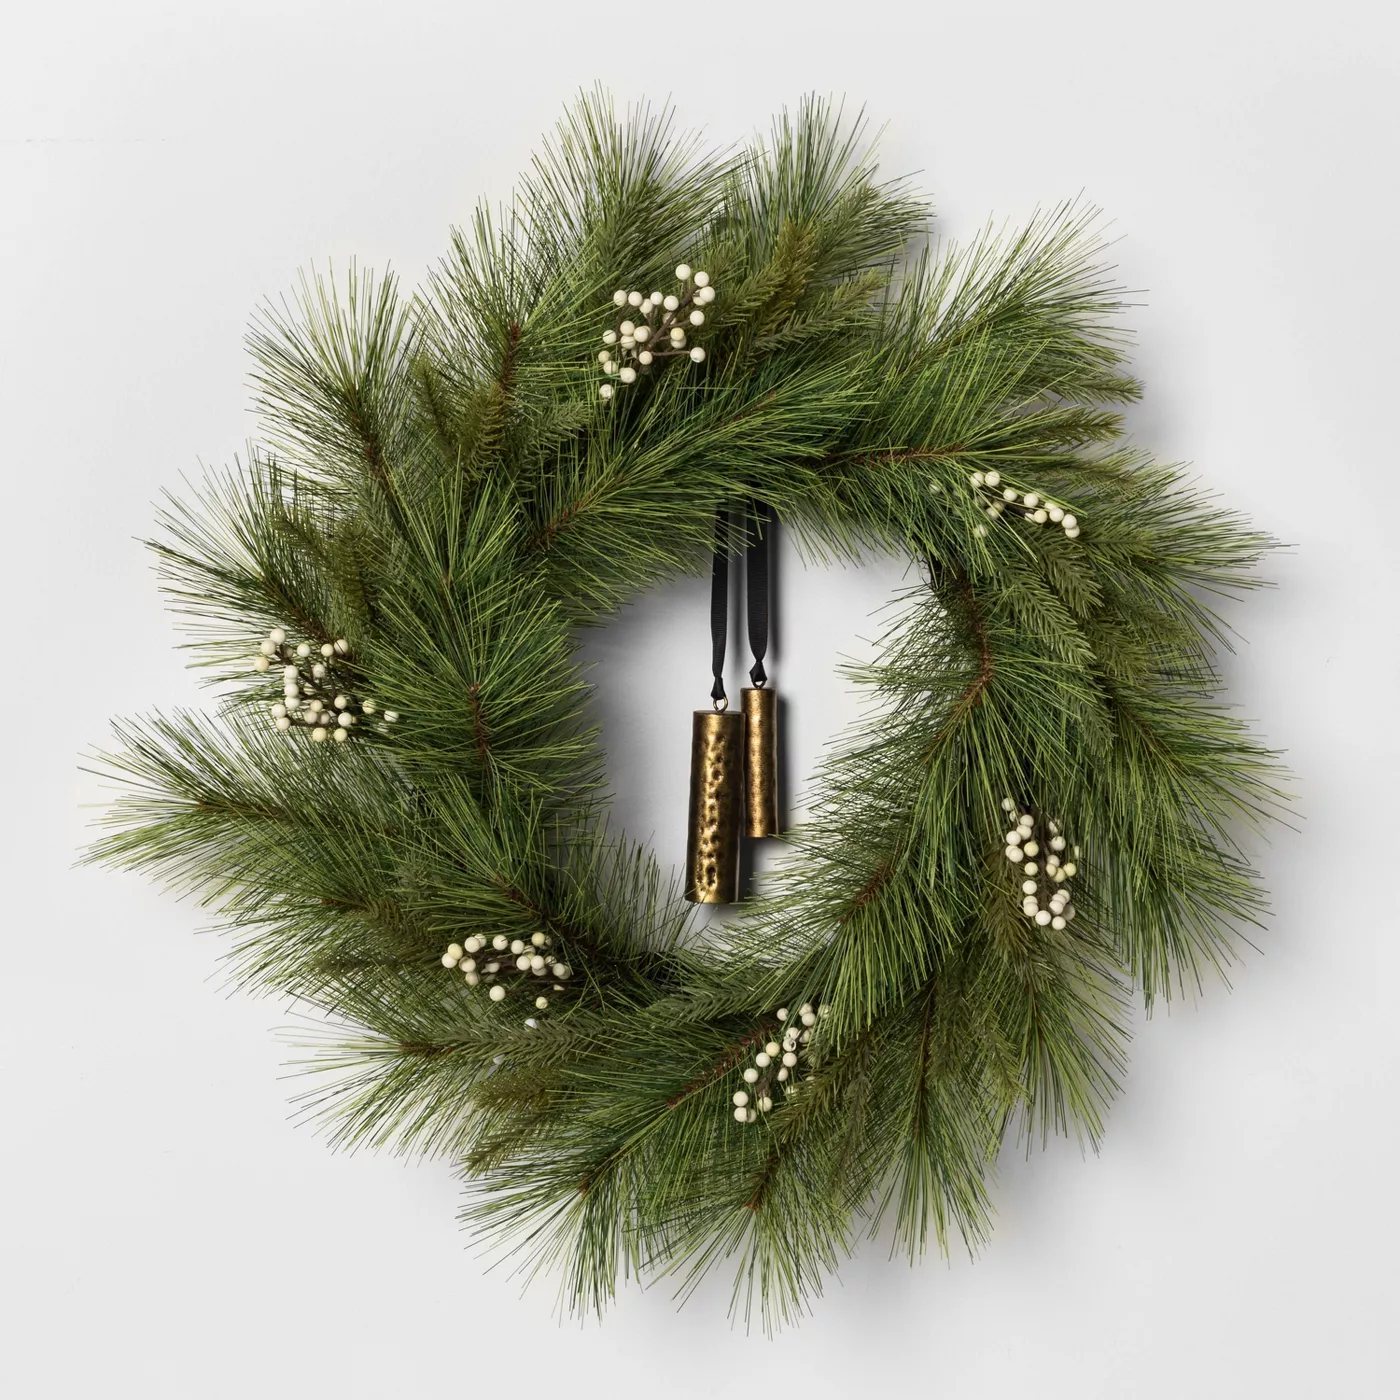 24" Faux White Pine Wreath with Metal Bell - Hearth & Hand™ with Magnolia - image 1 of 3